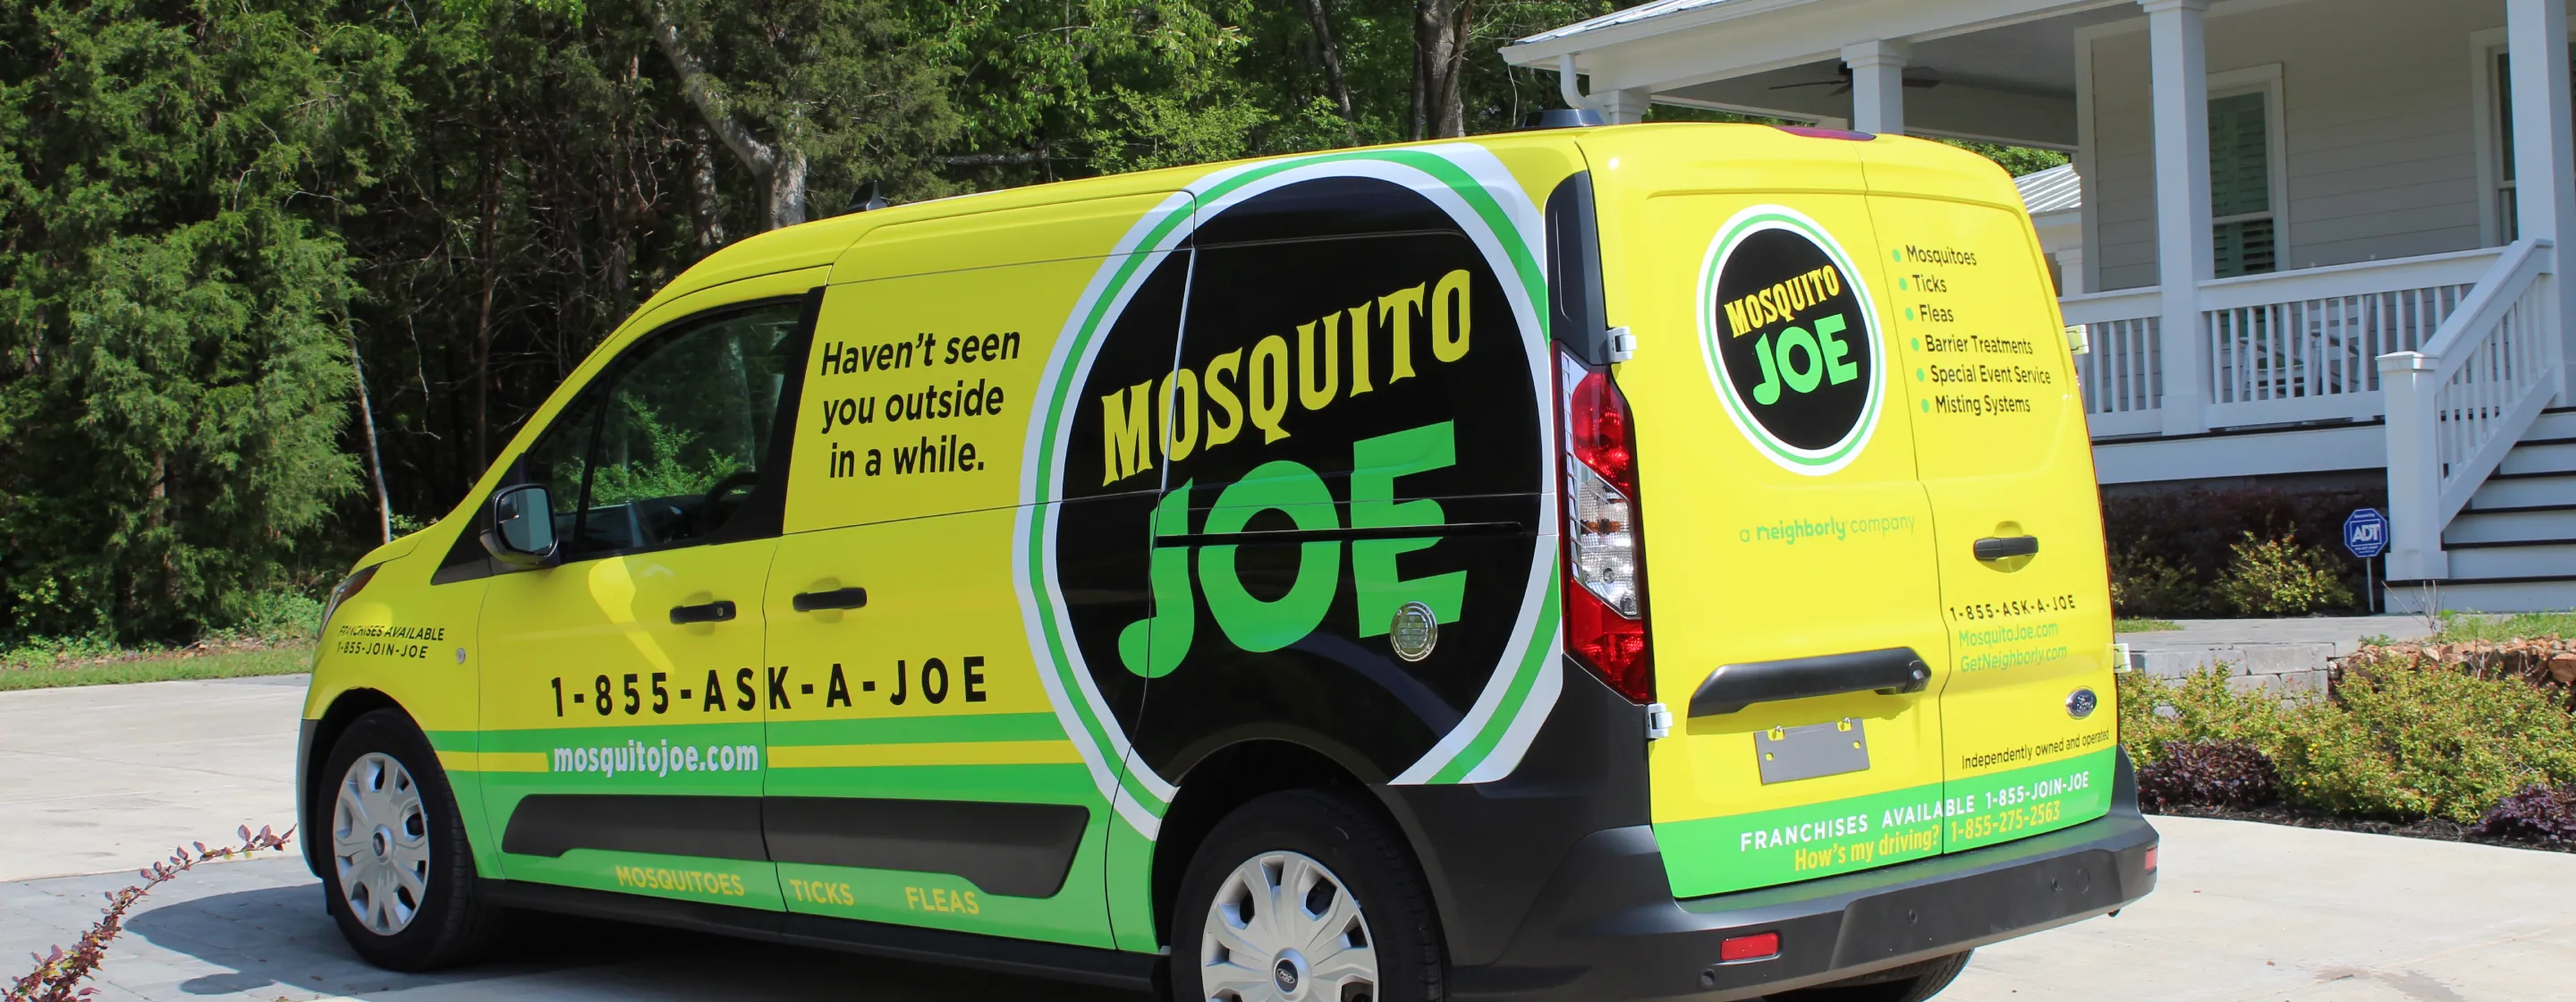 Mosquito Joe branded van parked in front of home.